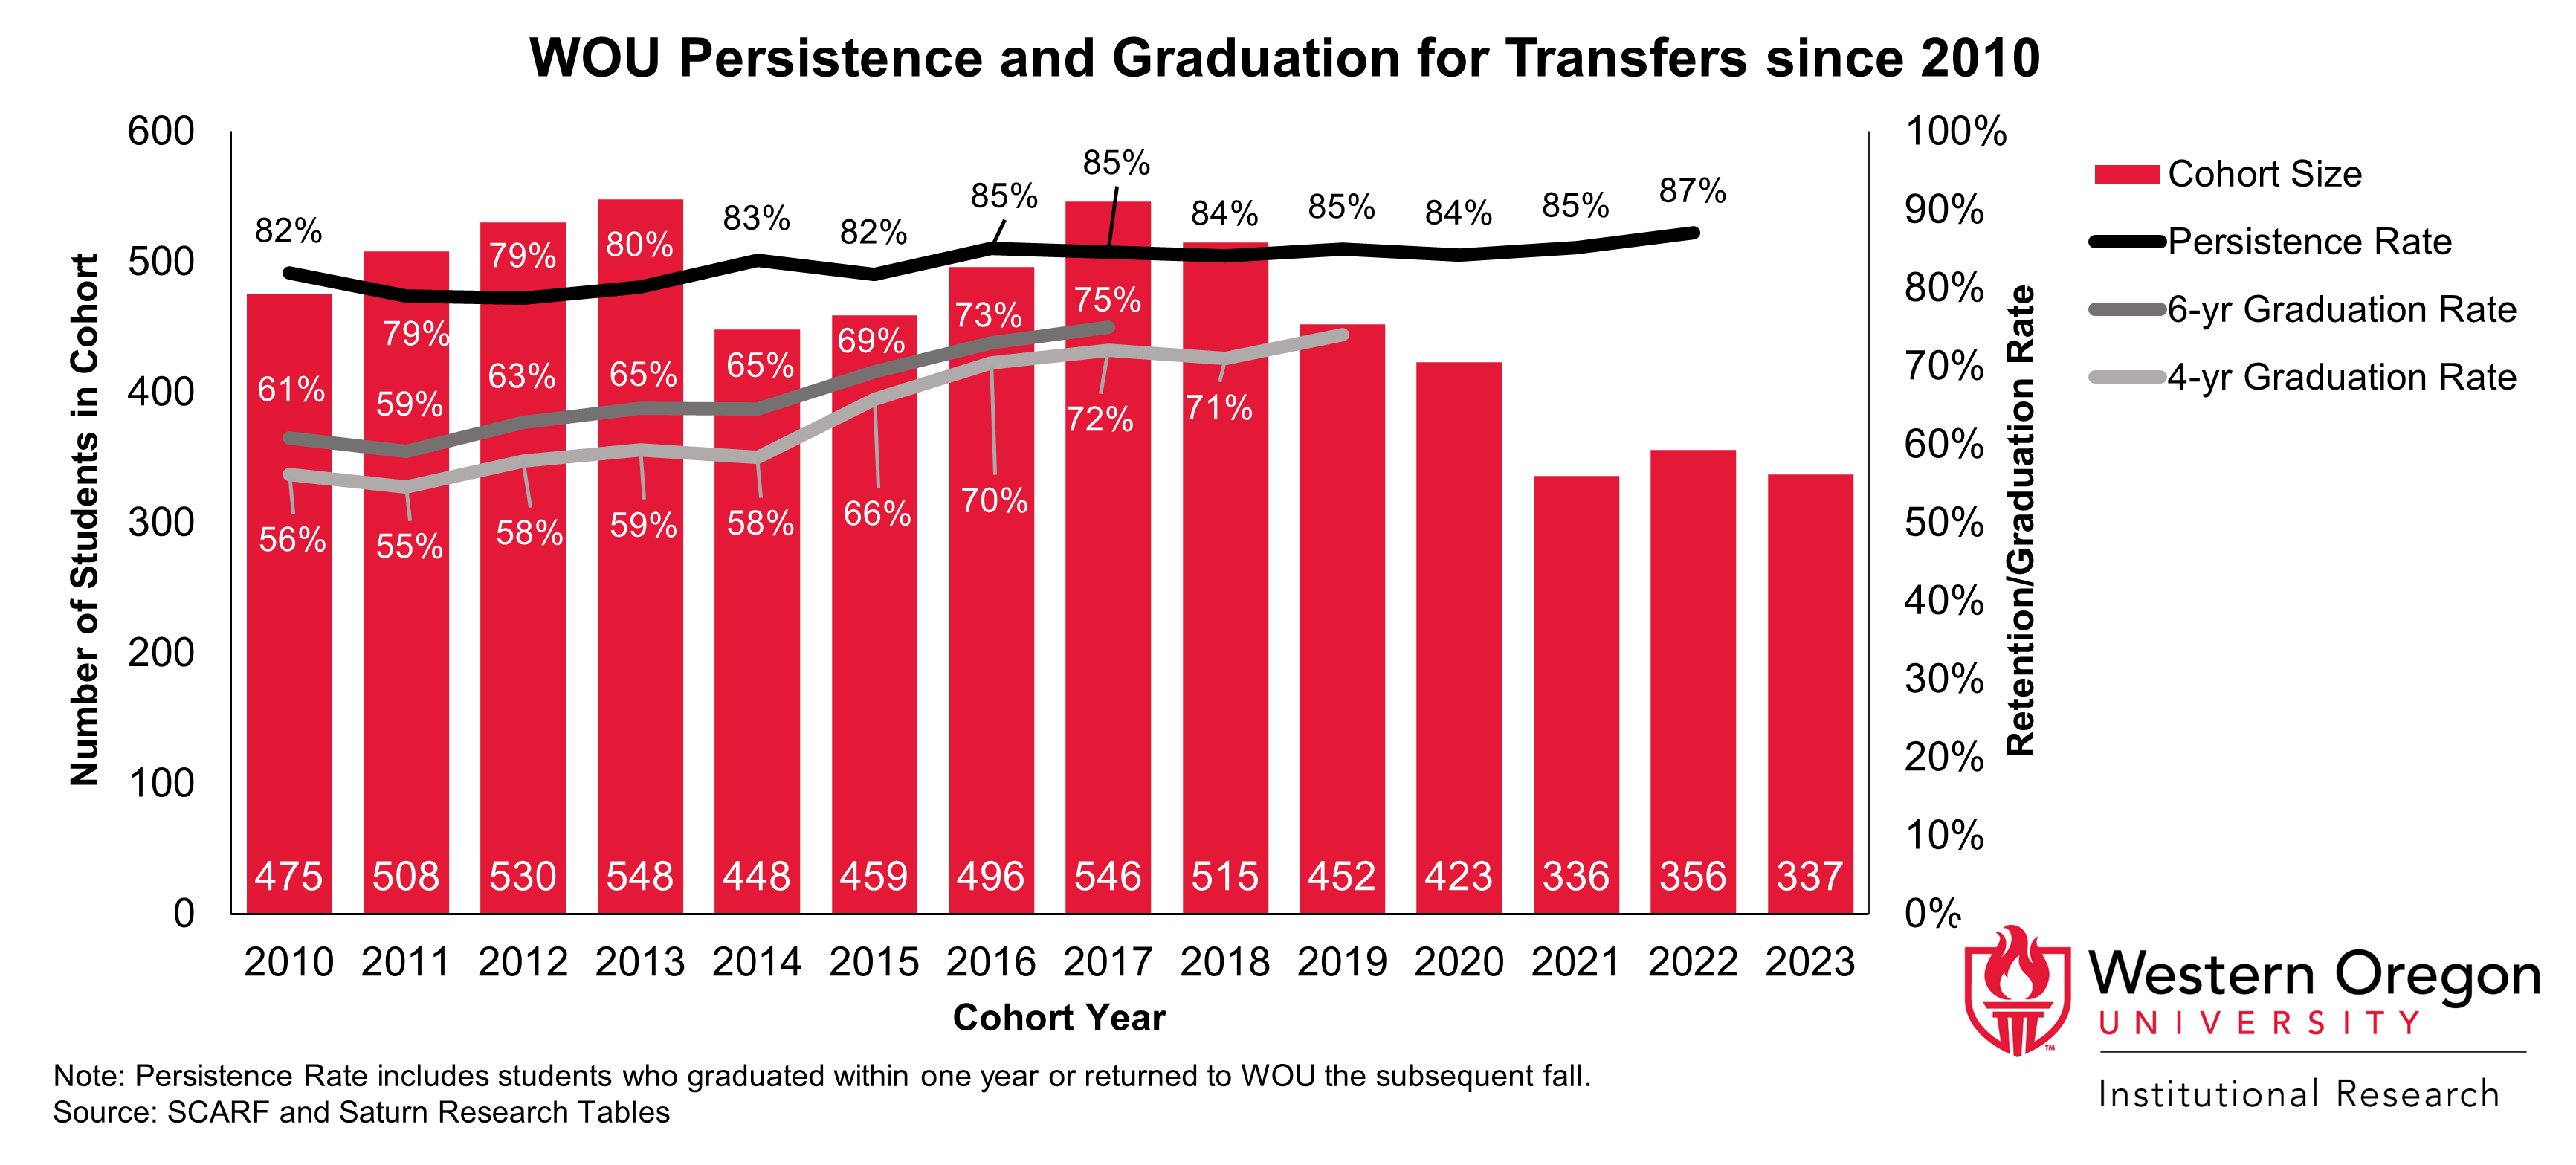 Bar and line graph of retention and 4- and 6-year graduation rates since 2010 for WOU transfer students, showing that graduation and retention rates have increased overall.